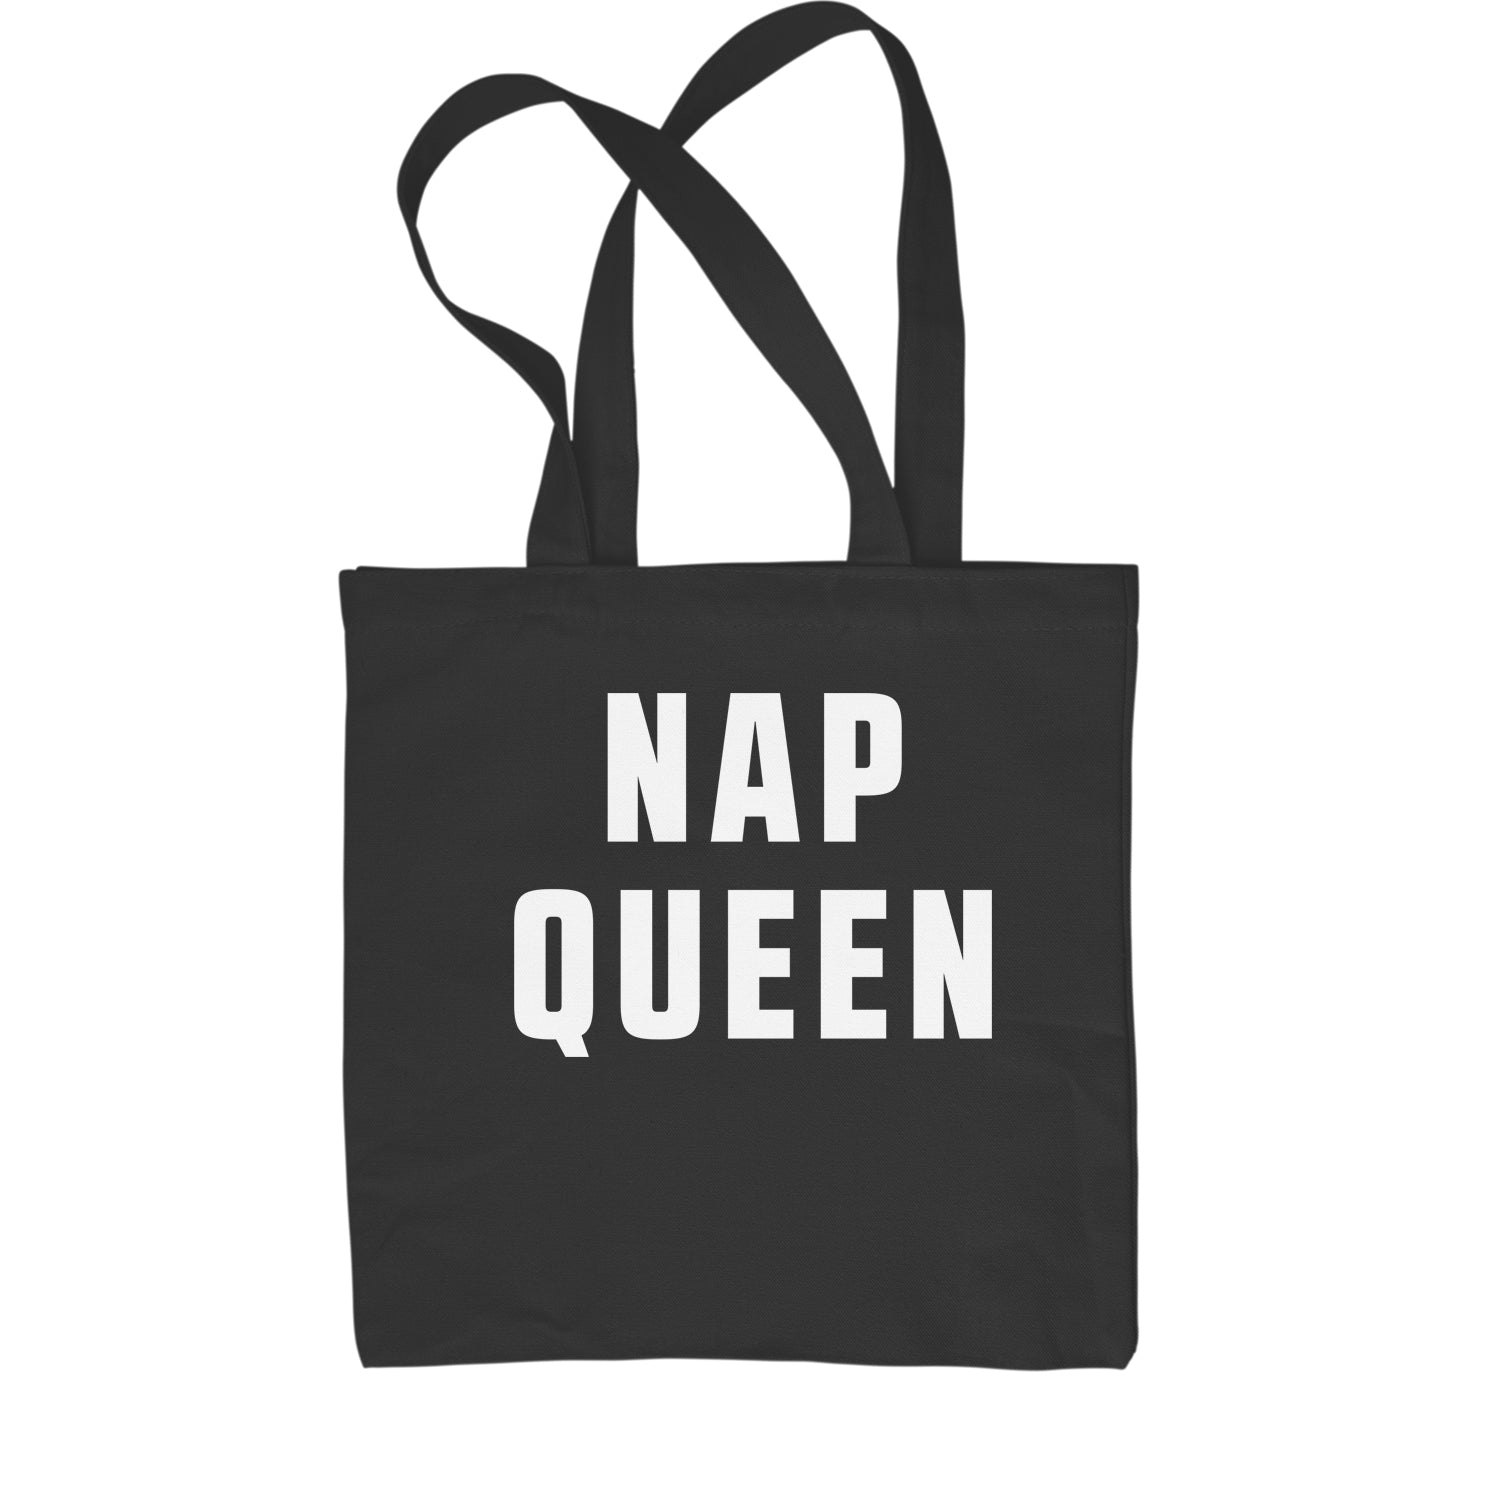 Nap Queen (White Print) Comfy Top For Lazy Days Shopping Tote Bag all, day, function, lazy, nap, pajamas, queen, siesta, sleep, tired, to, too by Expression Tees